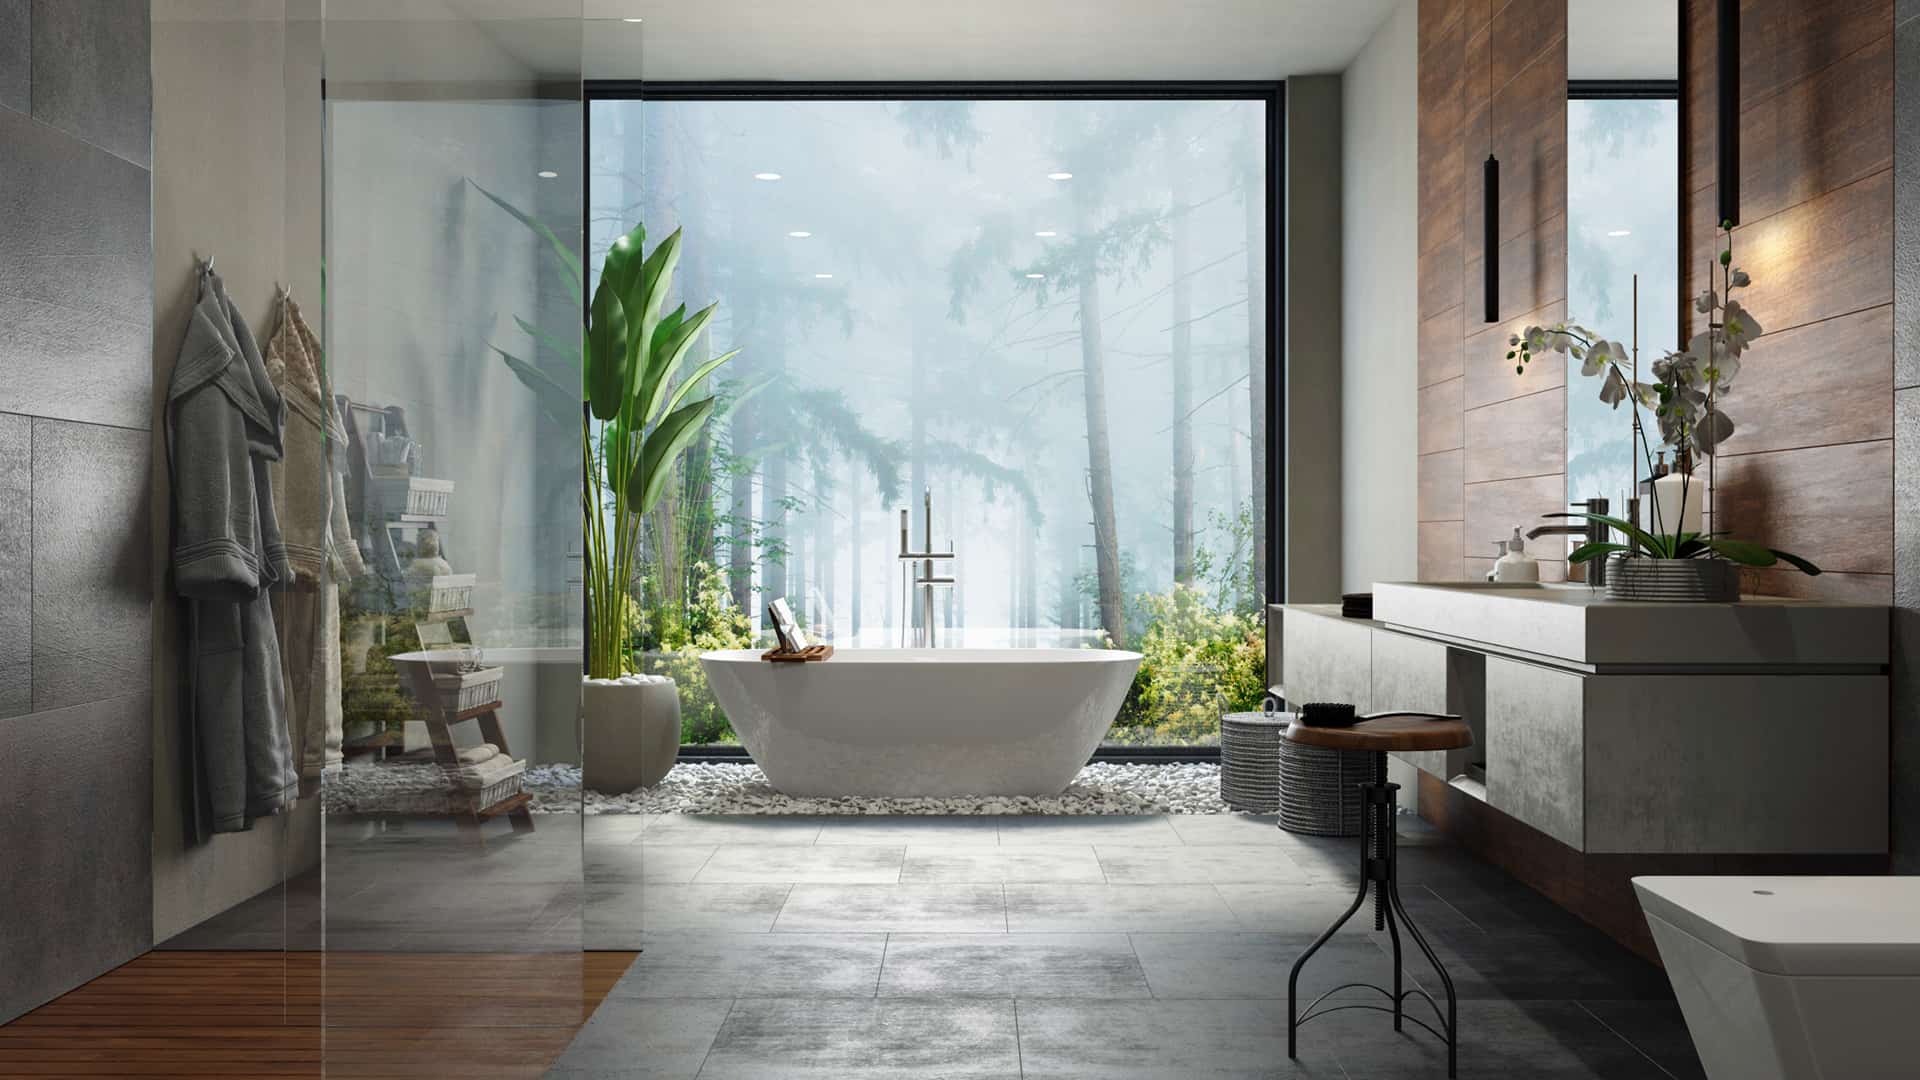 30 Spa Bathroom Ideas & Designs to Relax in Luxury